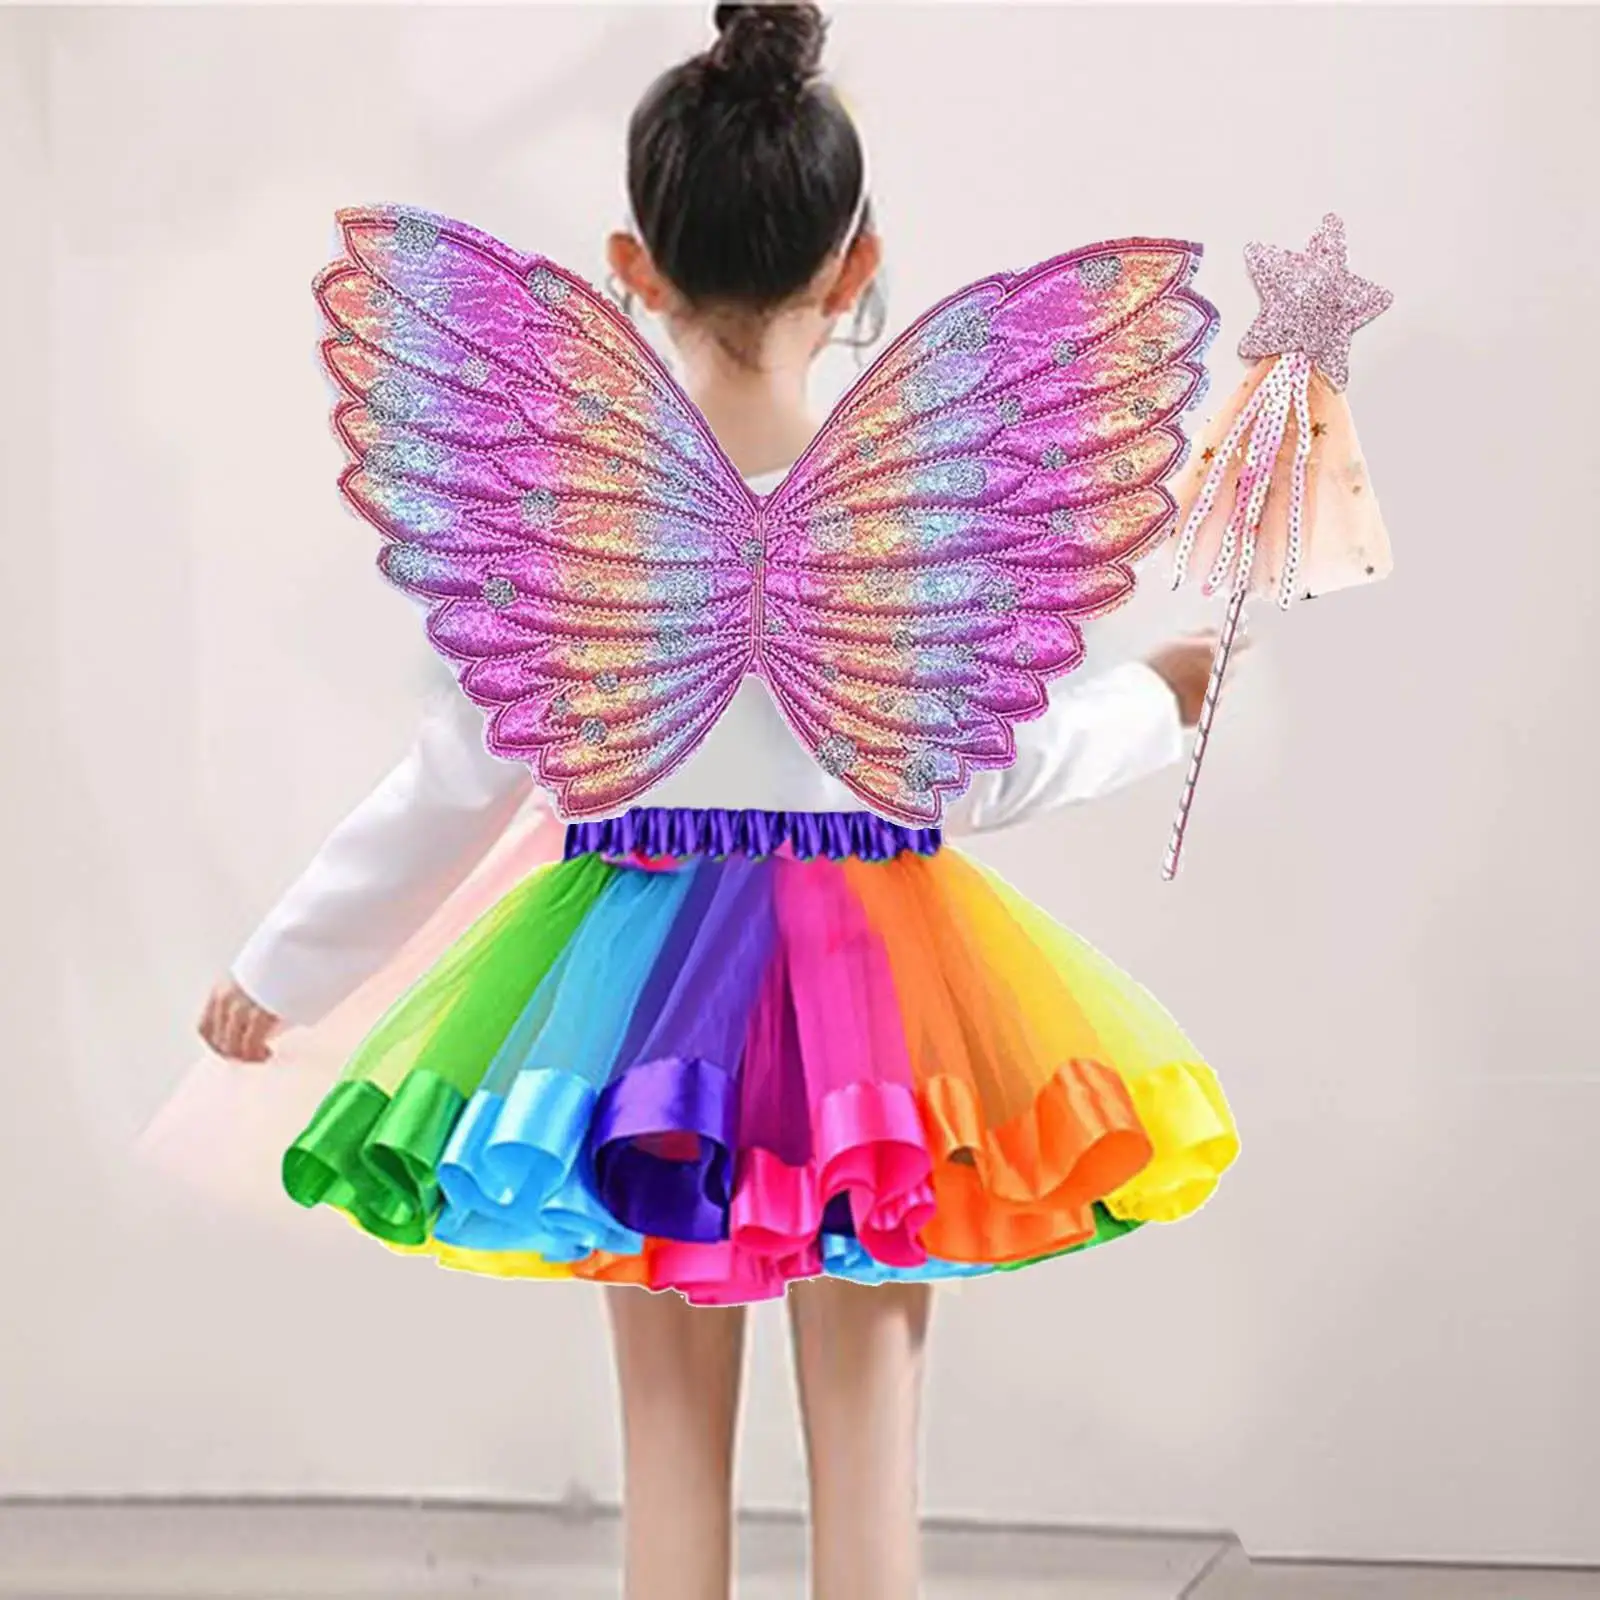 Girls Butterfly Wing Costume, Fancy Dress up  Child ,  Apparel Kids Outfit for Party Halloween Christmas Holiday